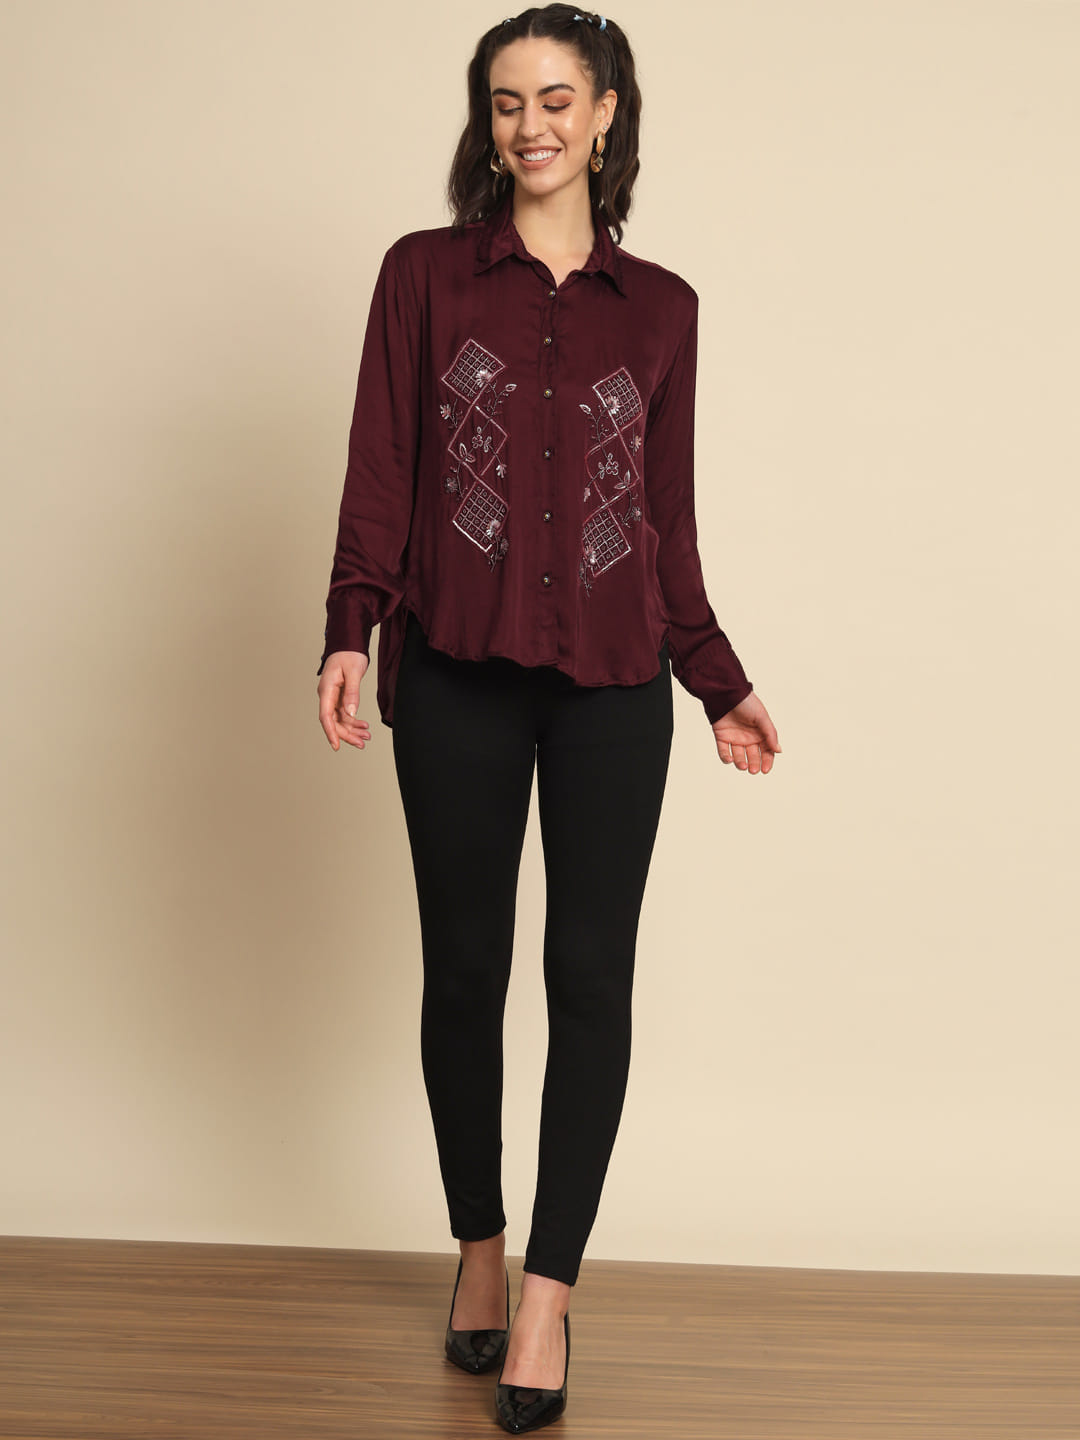 Scarlet Symphony: A Maroon Hand Embroidered Shirt